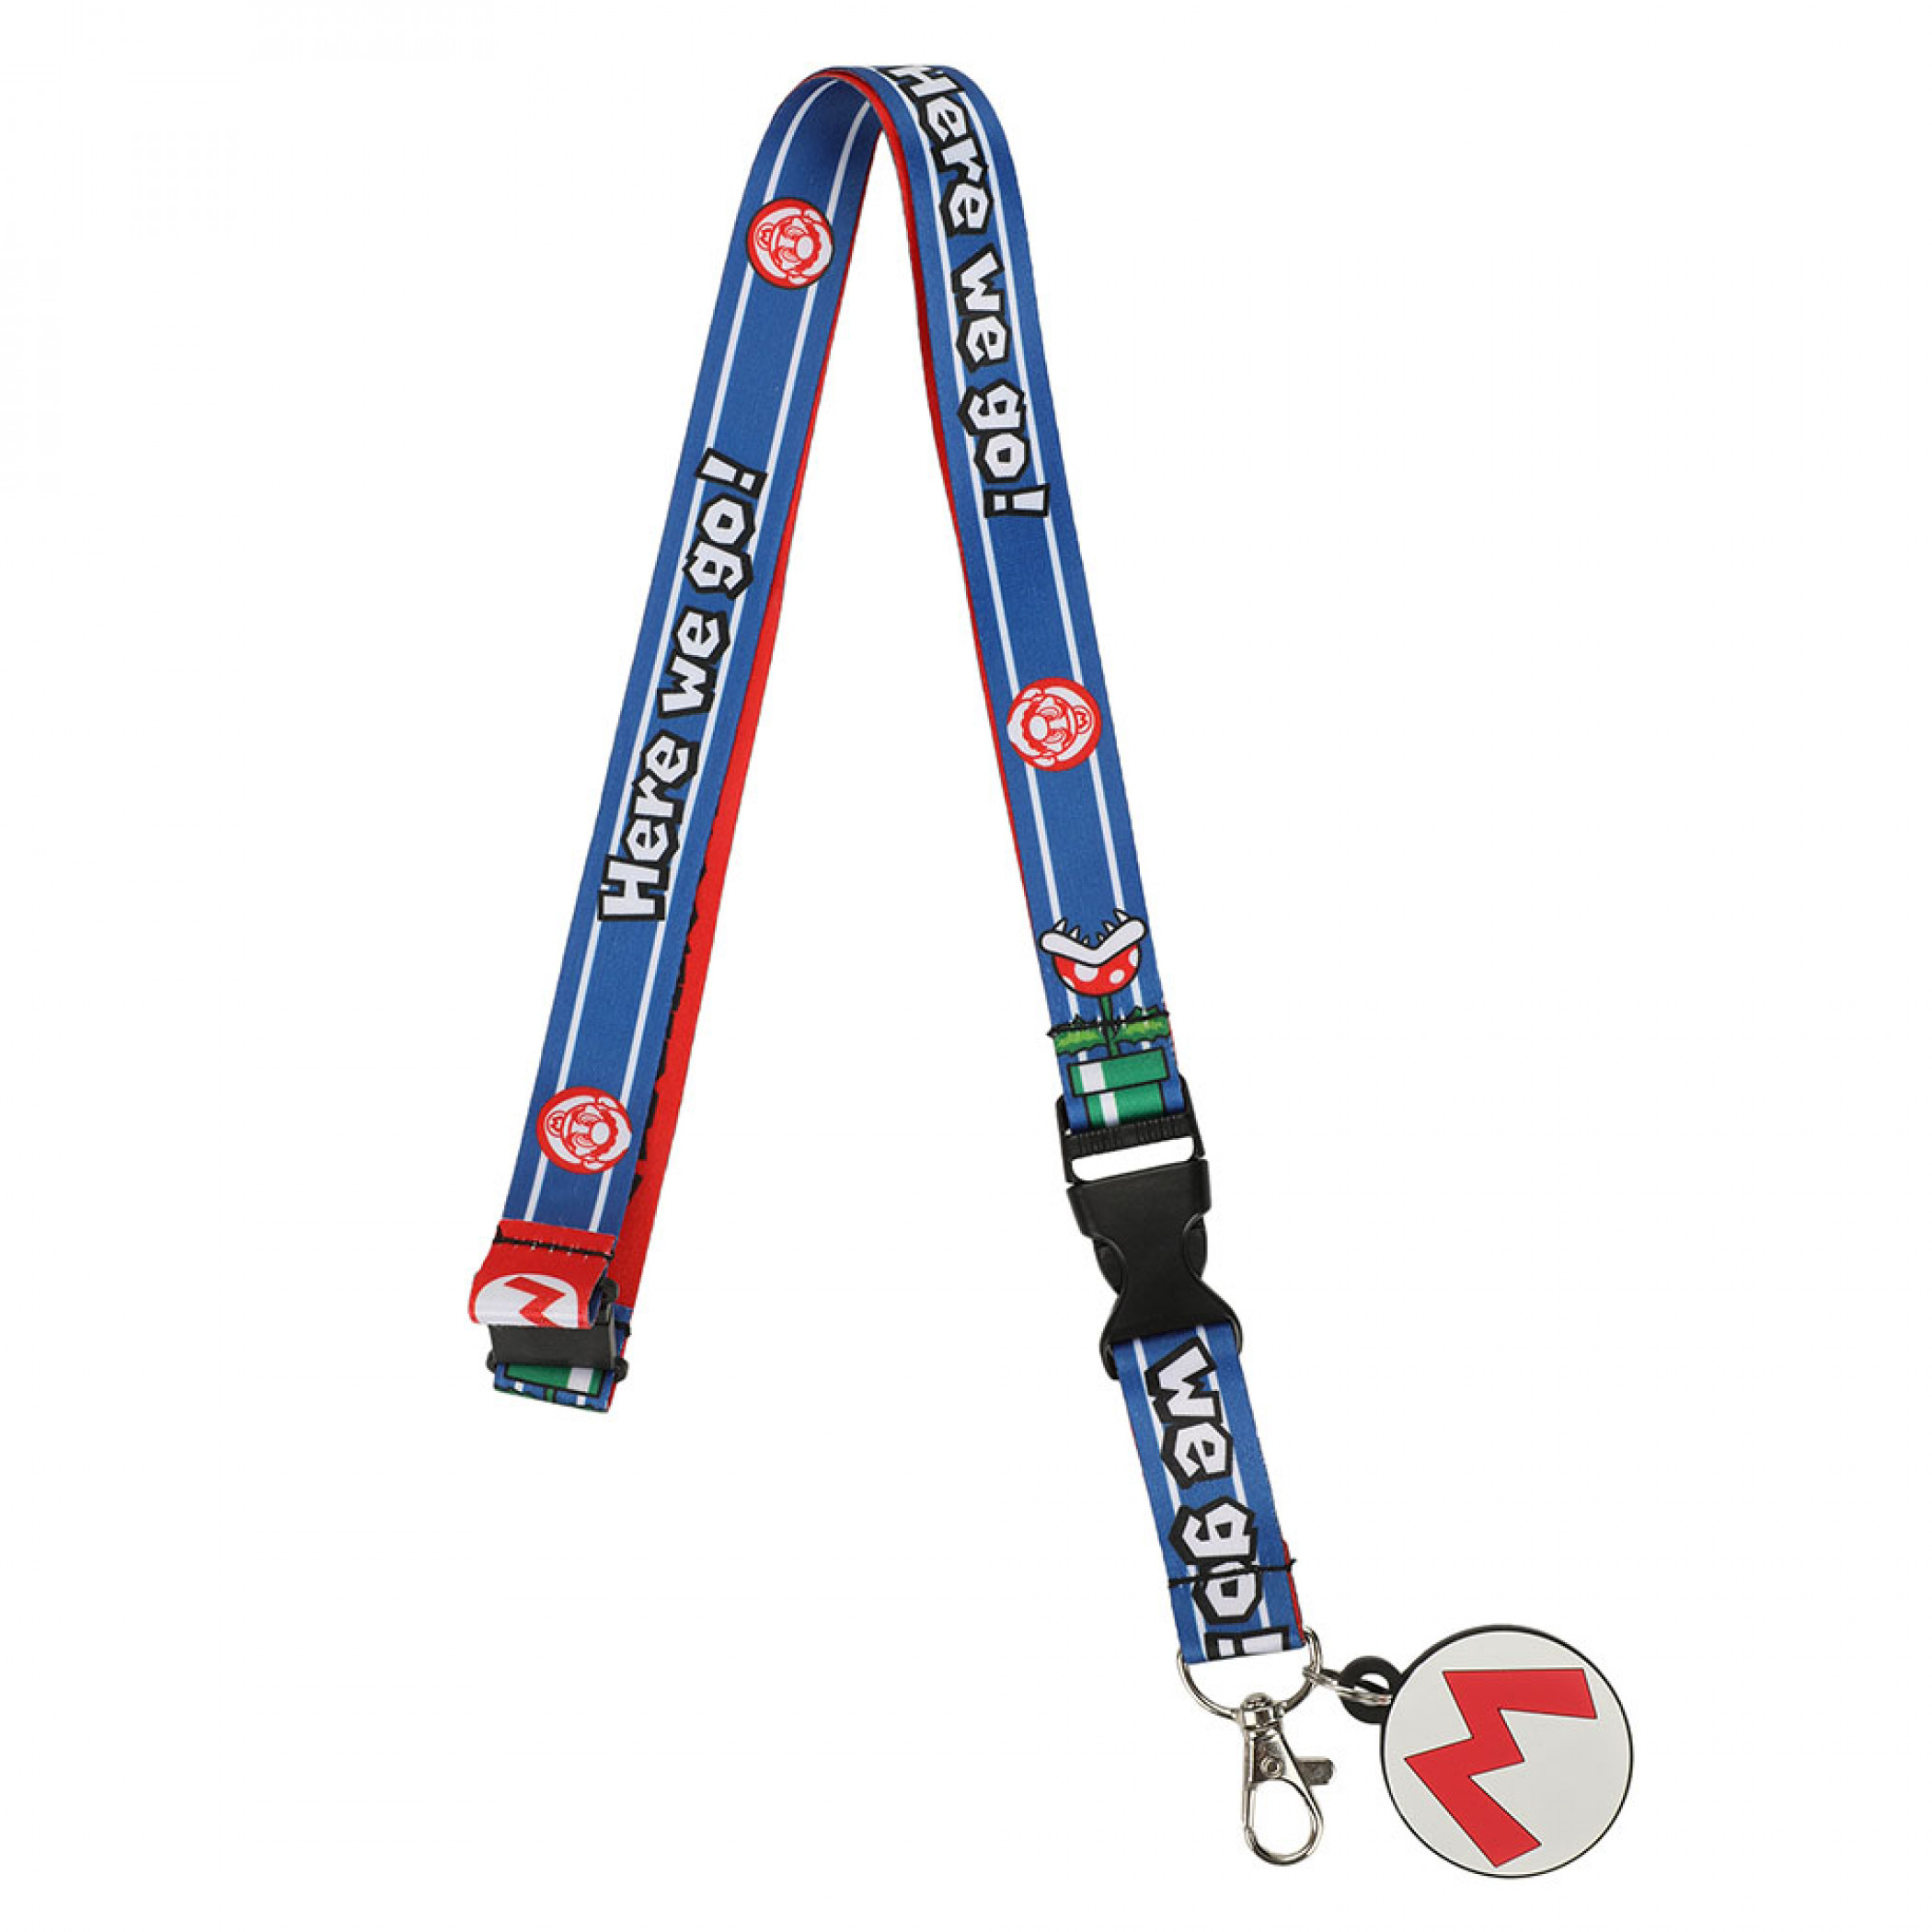 Super Mario Bros. Here We Go! Lanyard with Rubber Charm